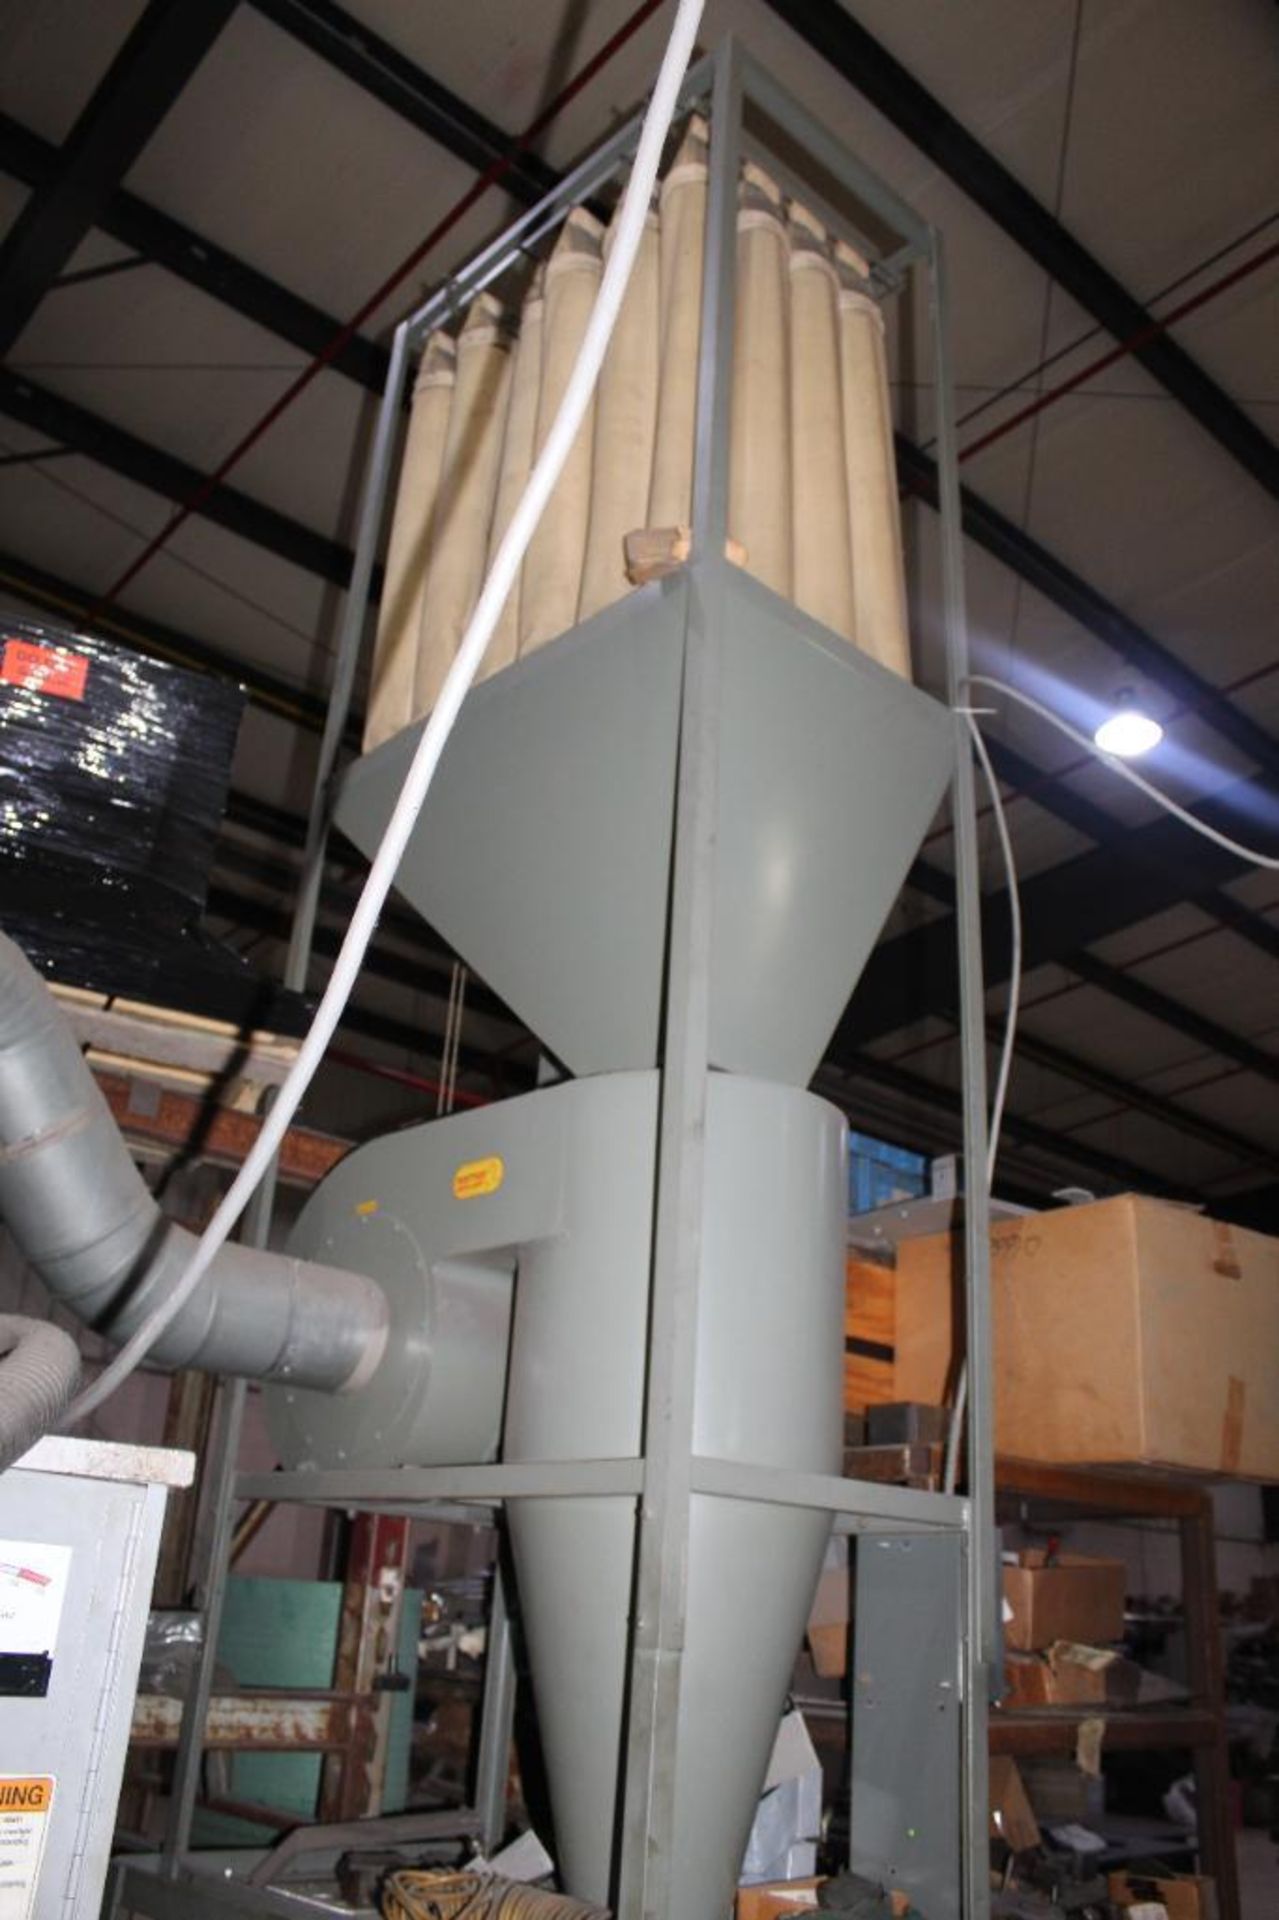 Dusktop Aget Model 20731-01 Dust Collector - Image 4 of 10